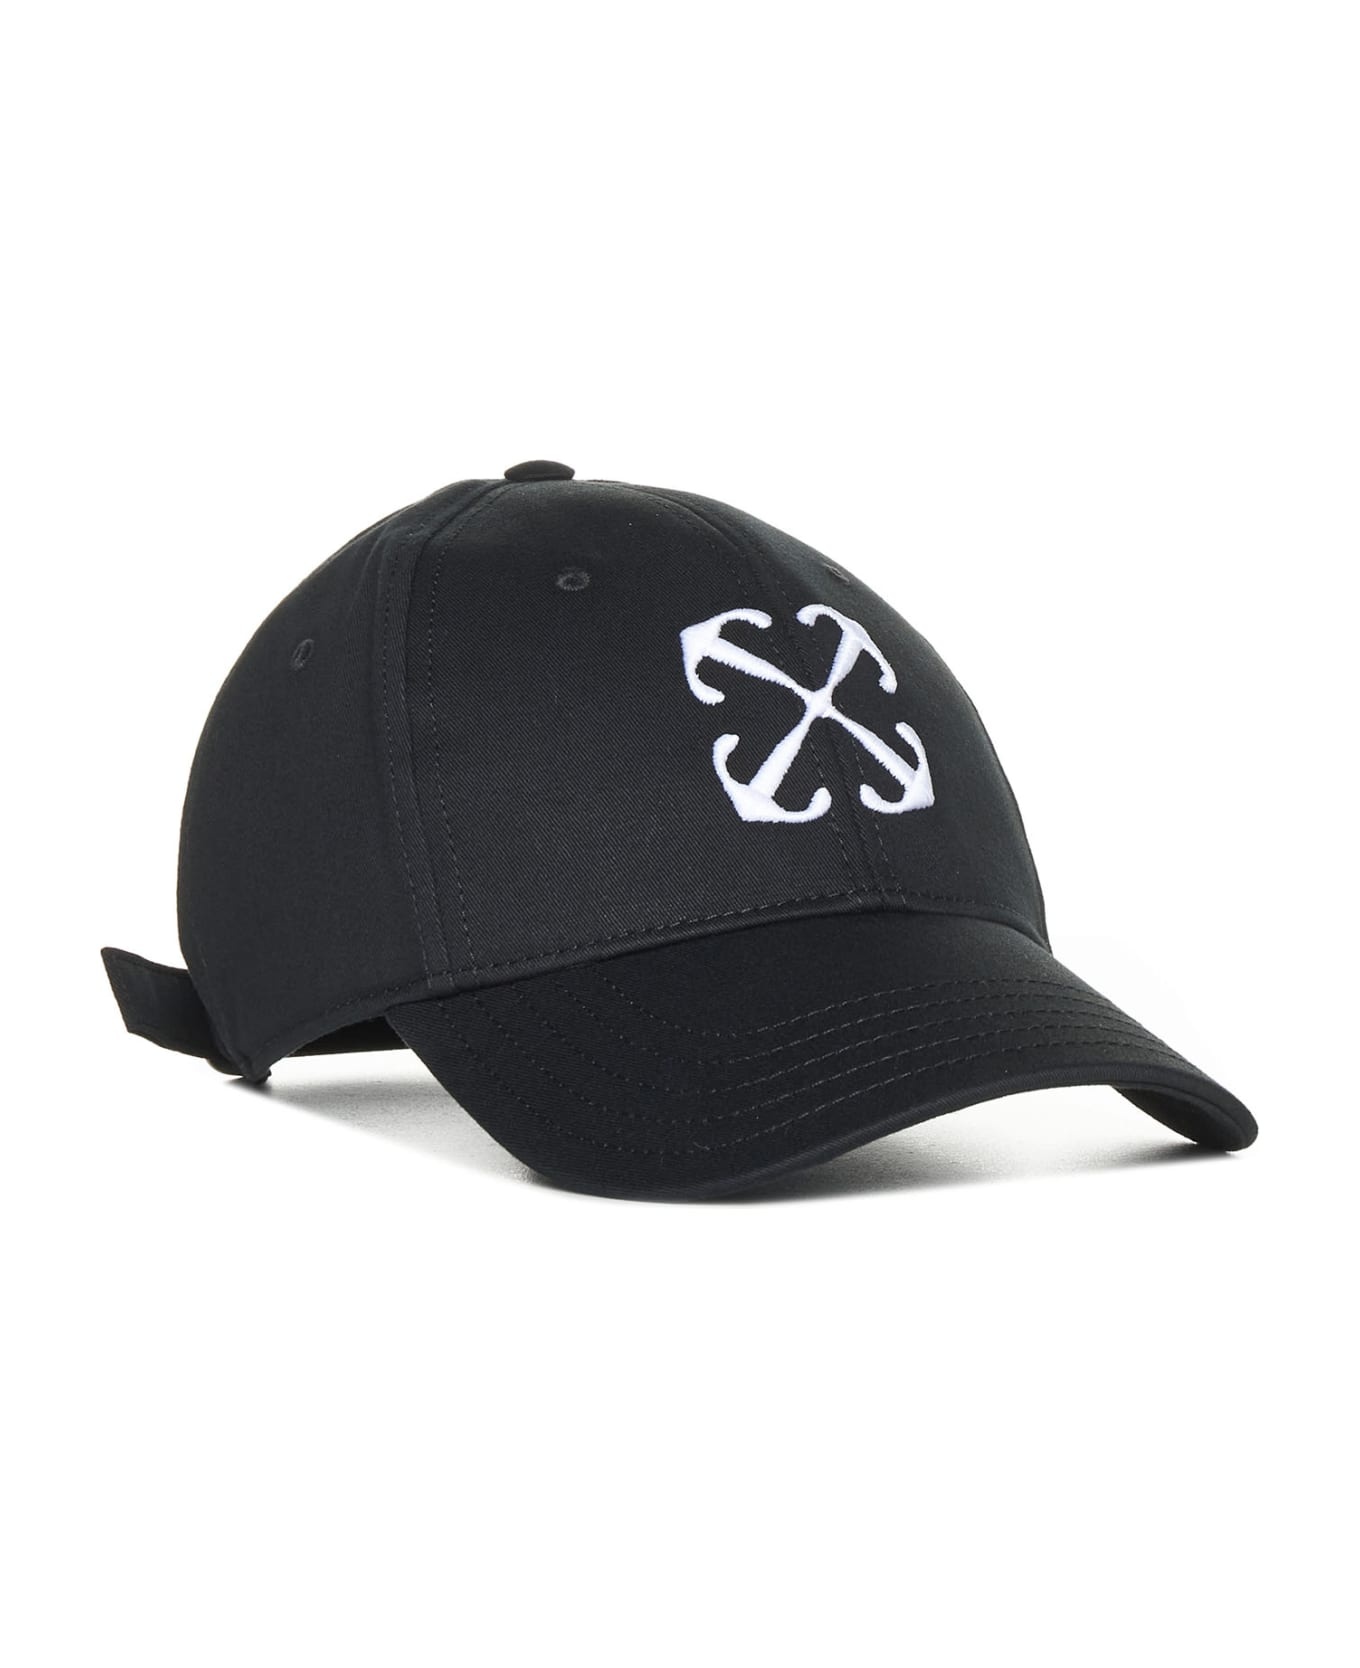 Baseball Cap With Embroidery - 2